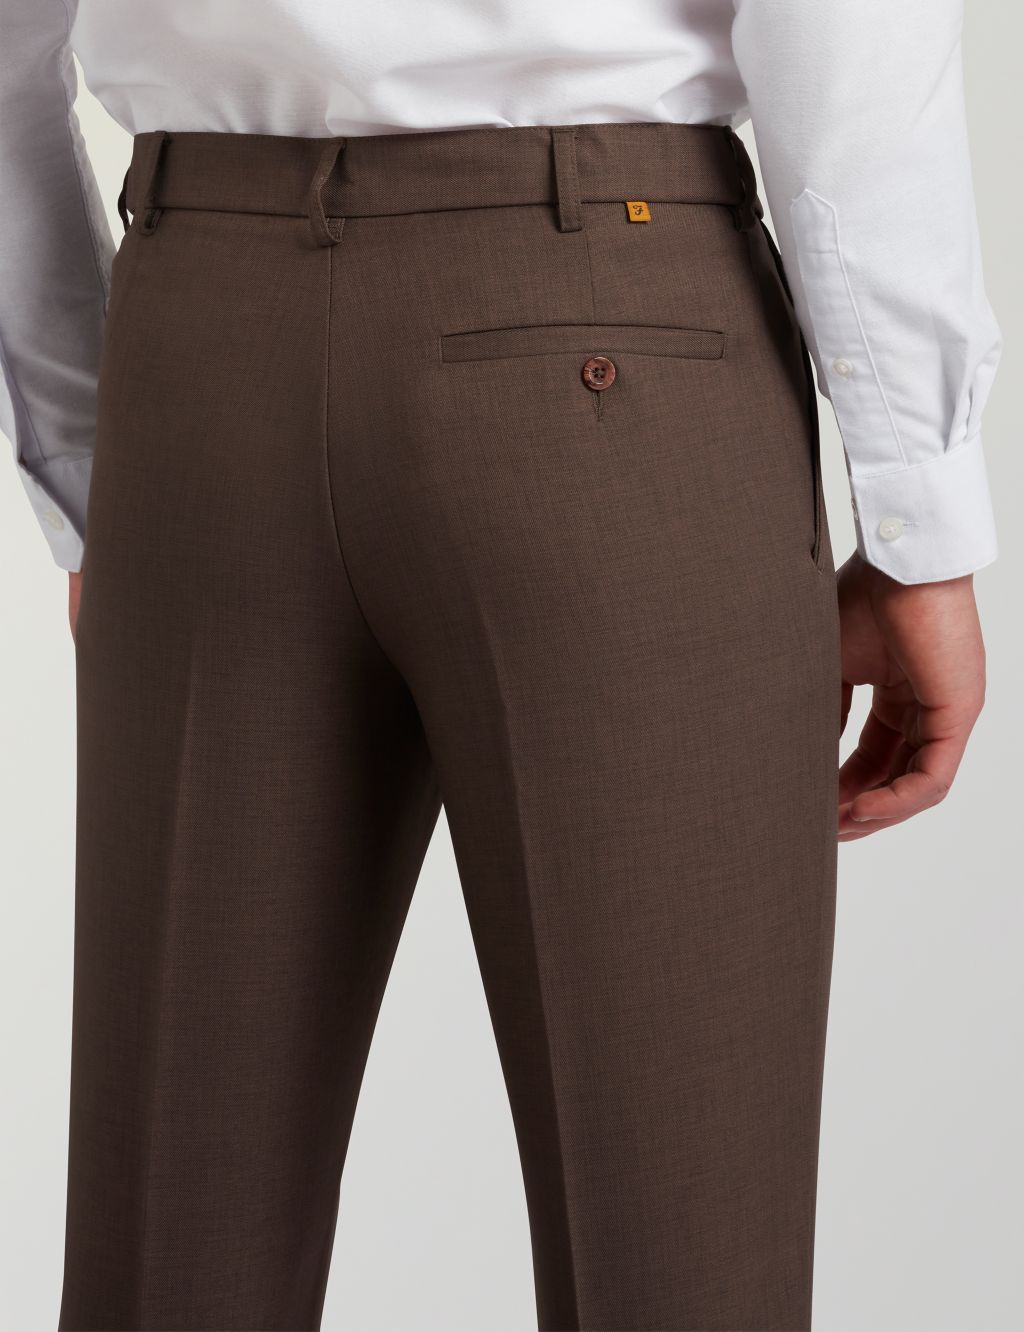 Tailored Fit Smart Trousers image 2